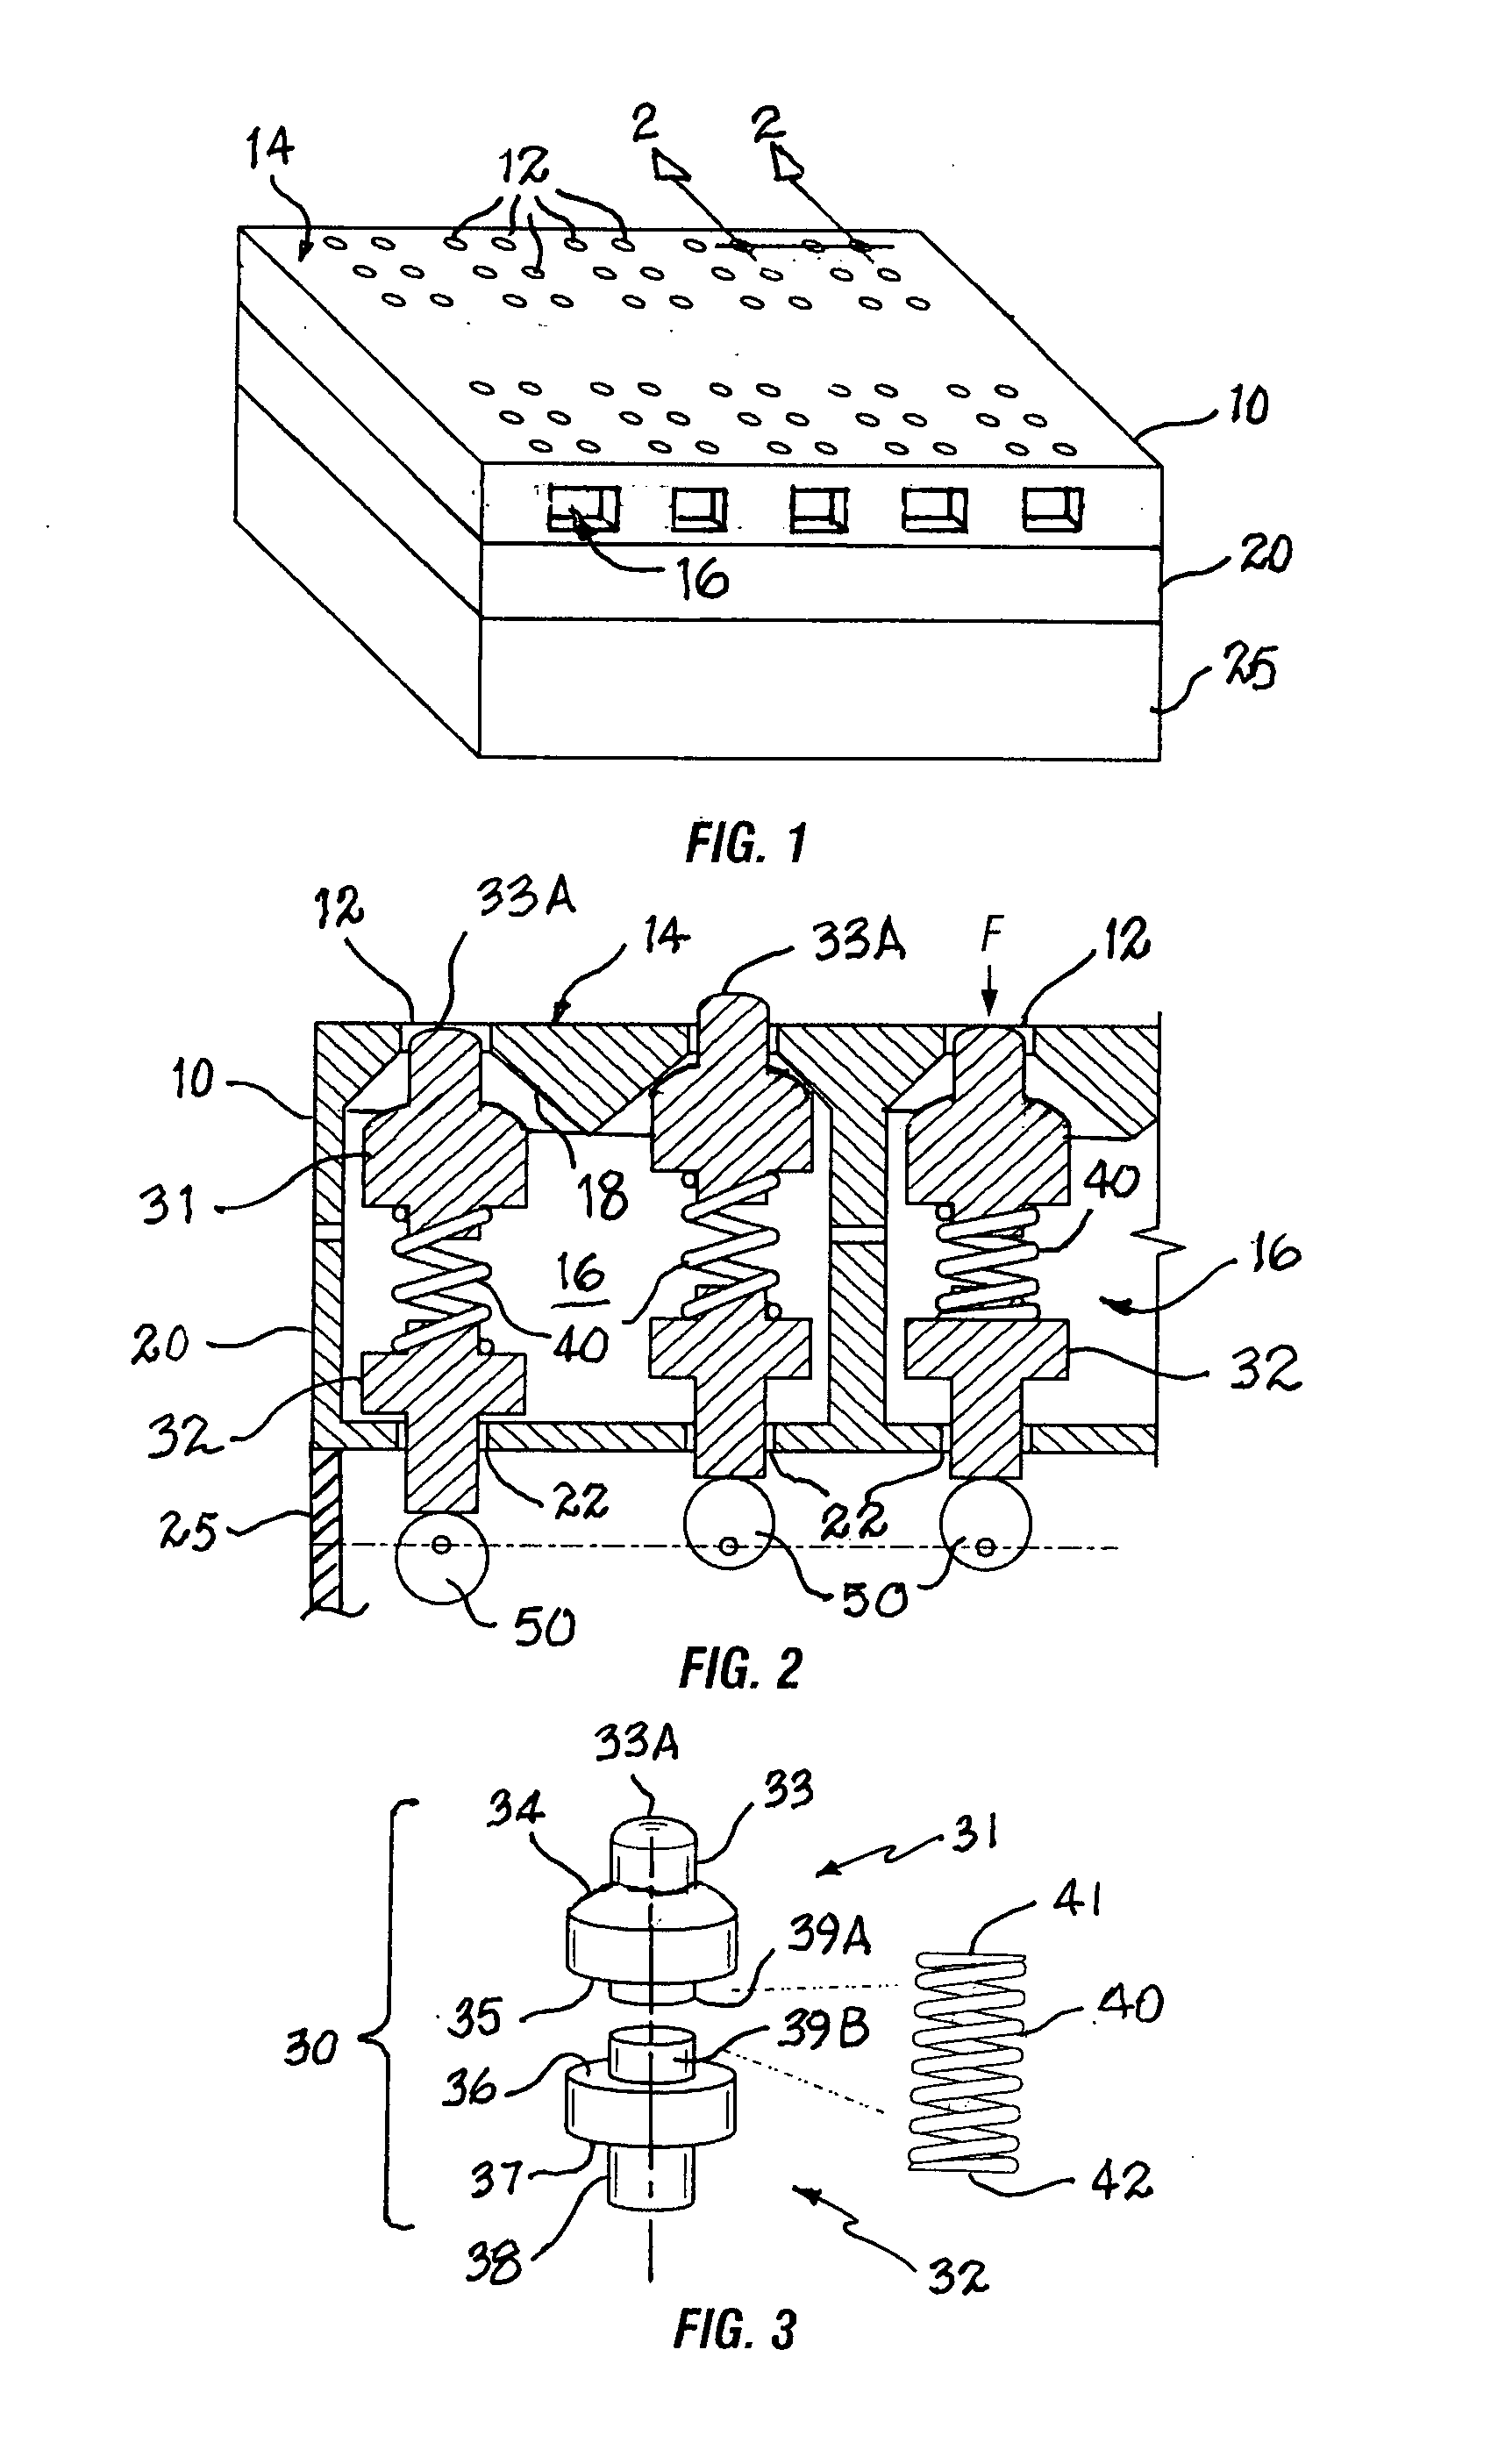 Braille module with compressible pin arrays